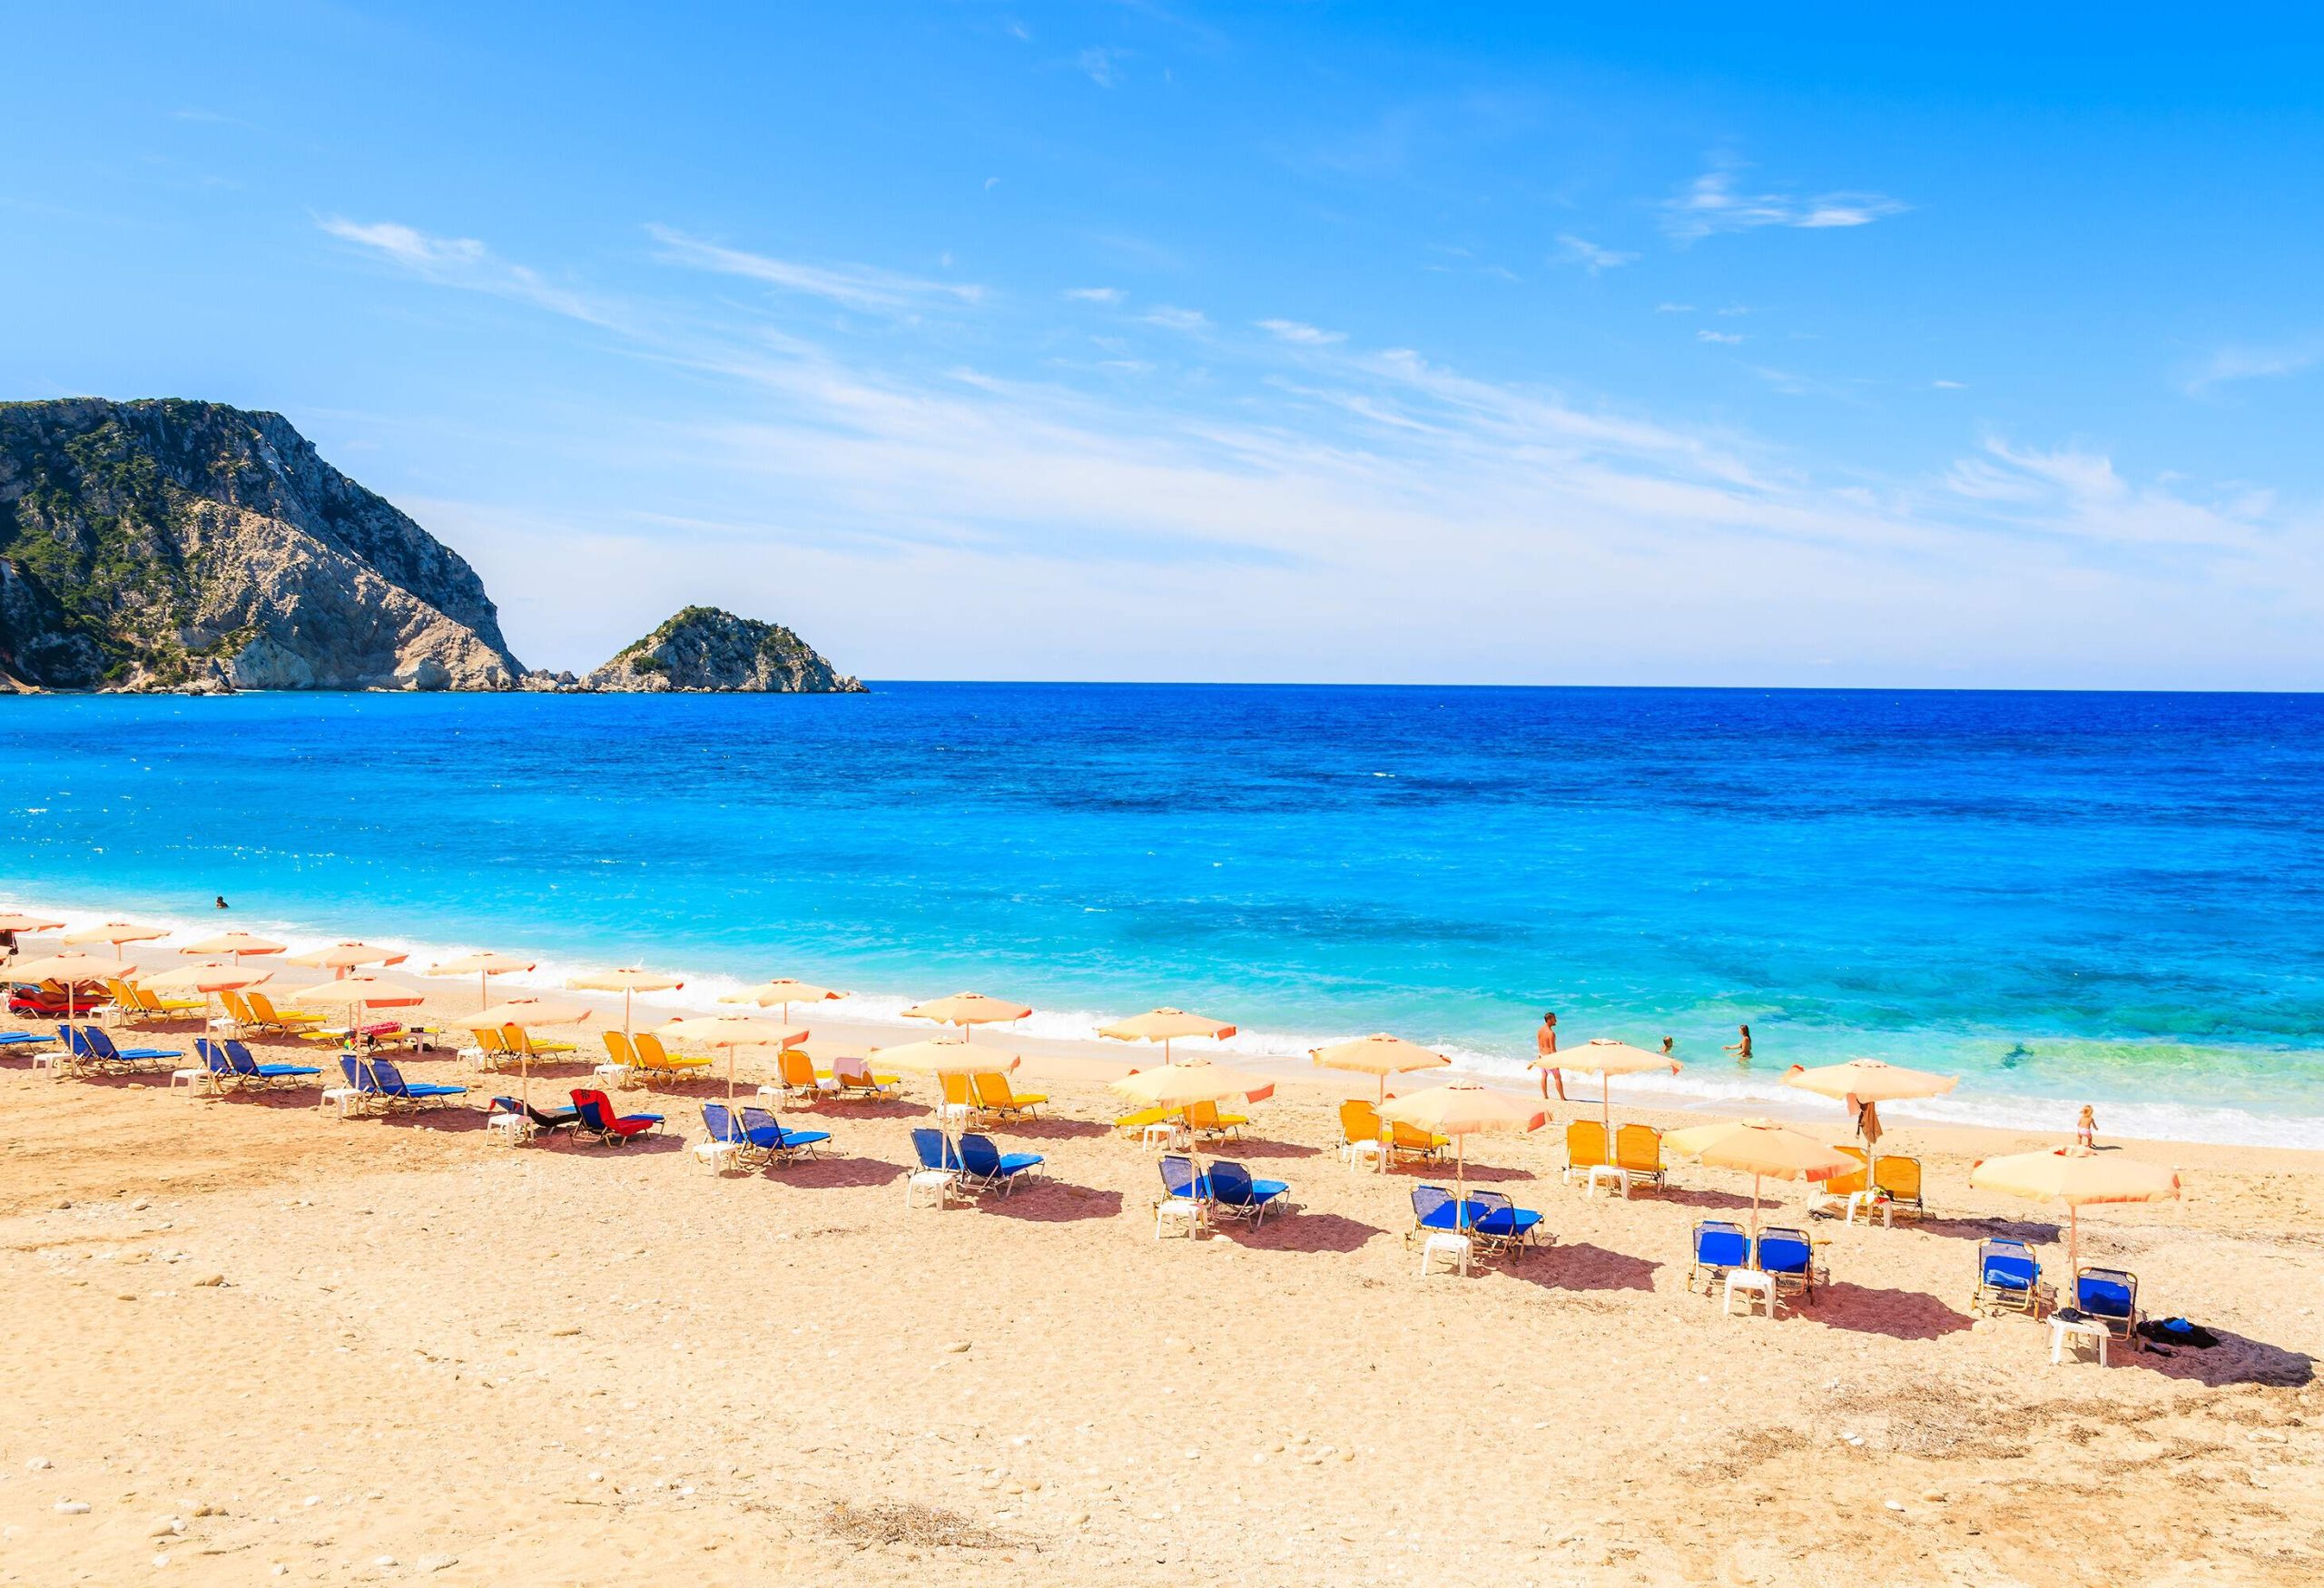 A stunning beach with rows of colourful parasols and blue sun loungers, where beachgoers relax and enjoy the soft waves and crystal-clear blue sea, is set against the backdrop of a steep and rugged rock formation.